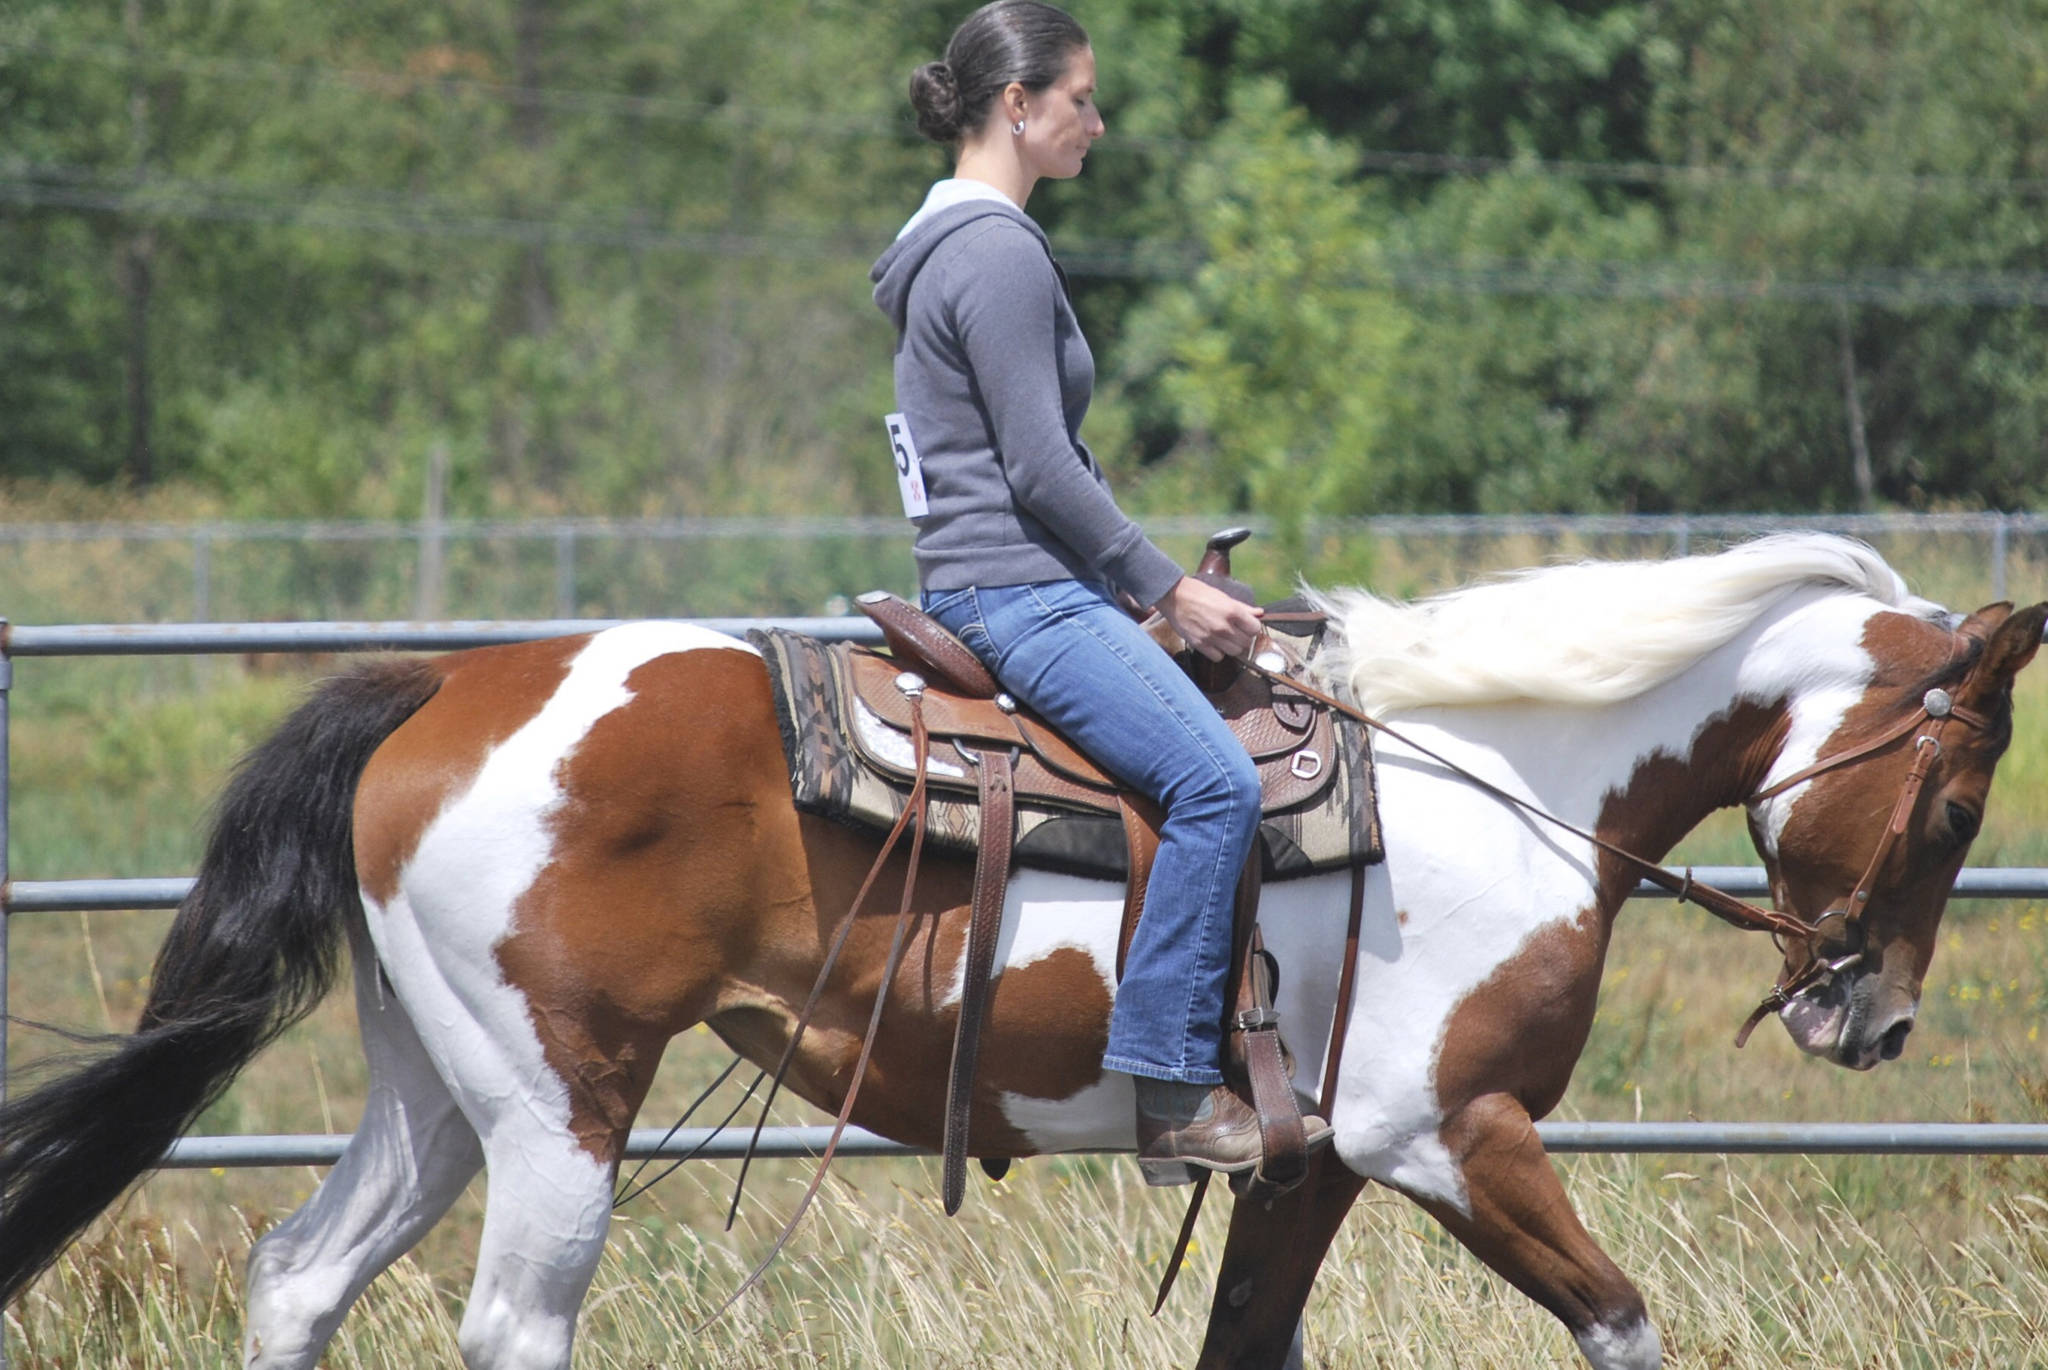 Amy Randall rides her horse, Jewel, during the the Boeing Employees Saddle Club (BESC) show last year at Reber Ranch. The horse show returns to the Reber Ranch, 28606 132nd Ave. SE, Kent, on Saturday, July 28, from 8 a.m. to 4 p.m. The show includes English and Western Pleasure riding. COURTESY PHOTO